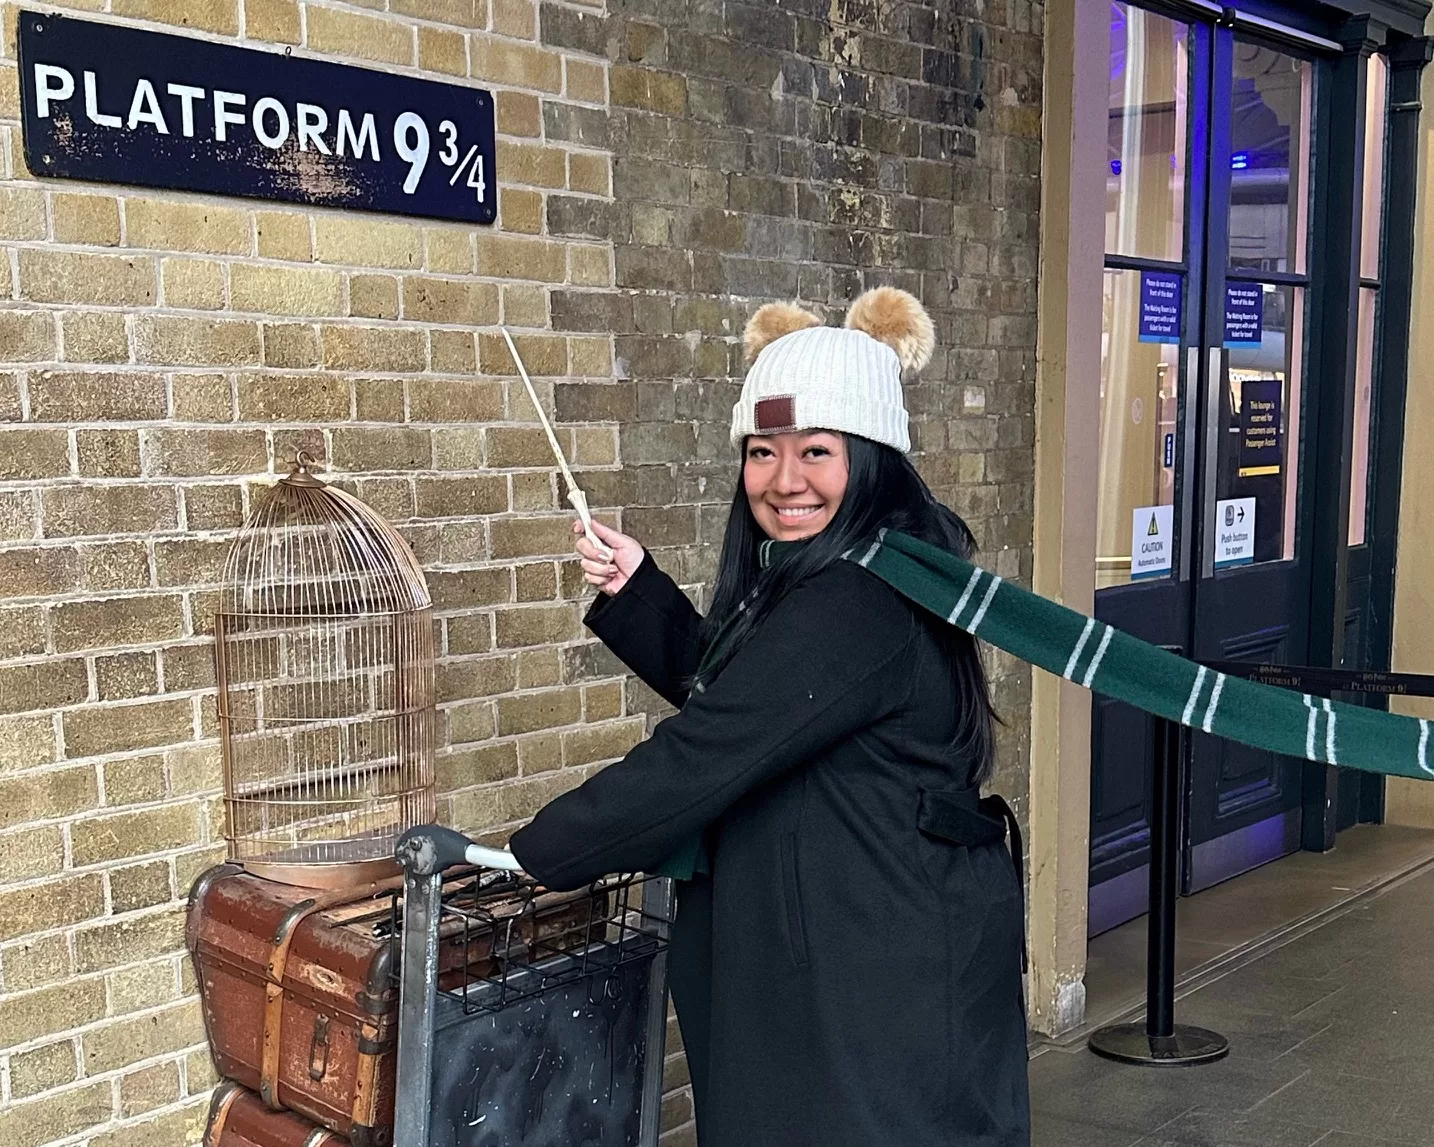 Platform 9 3/4 (Everything You Need To Know)